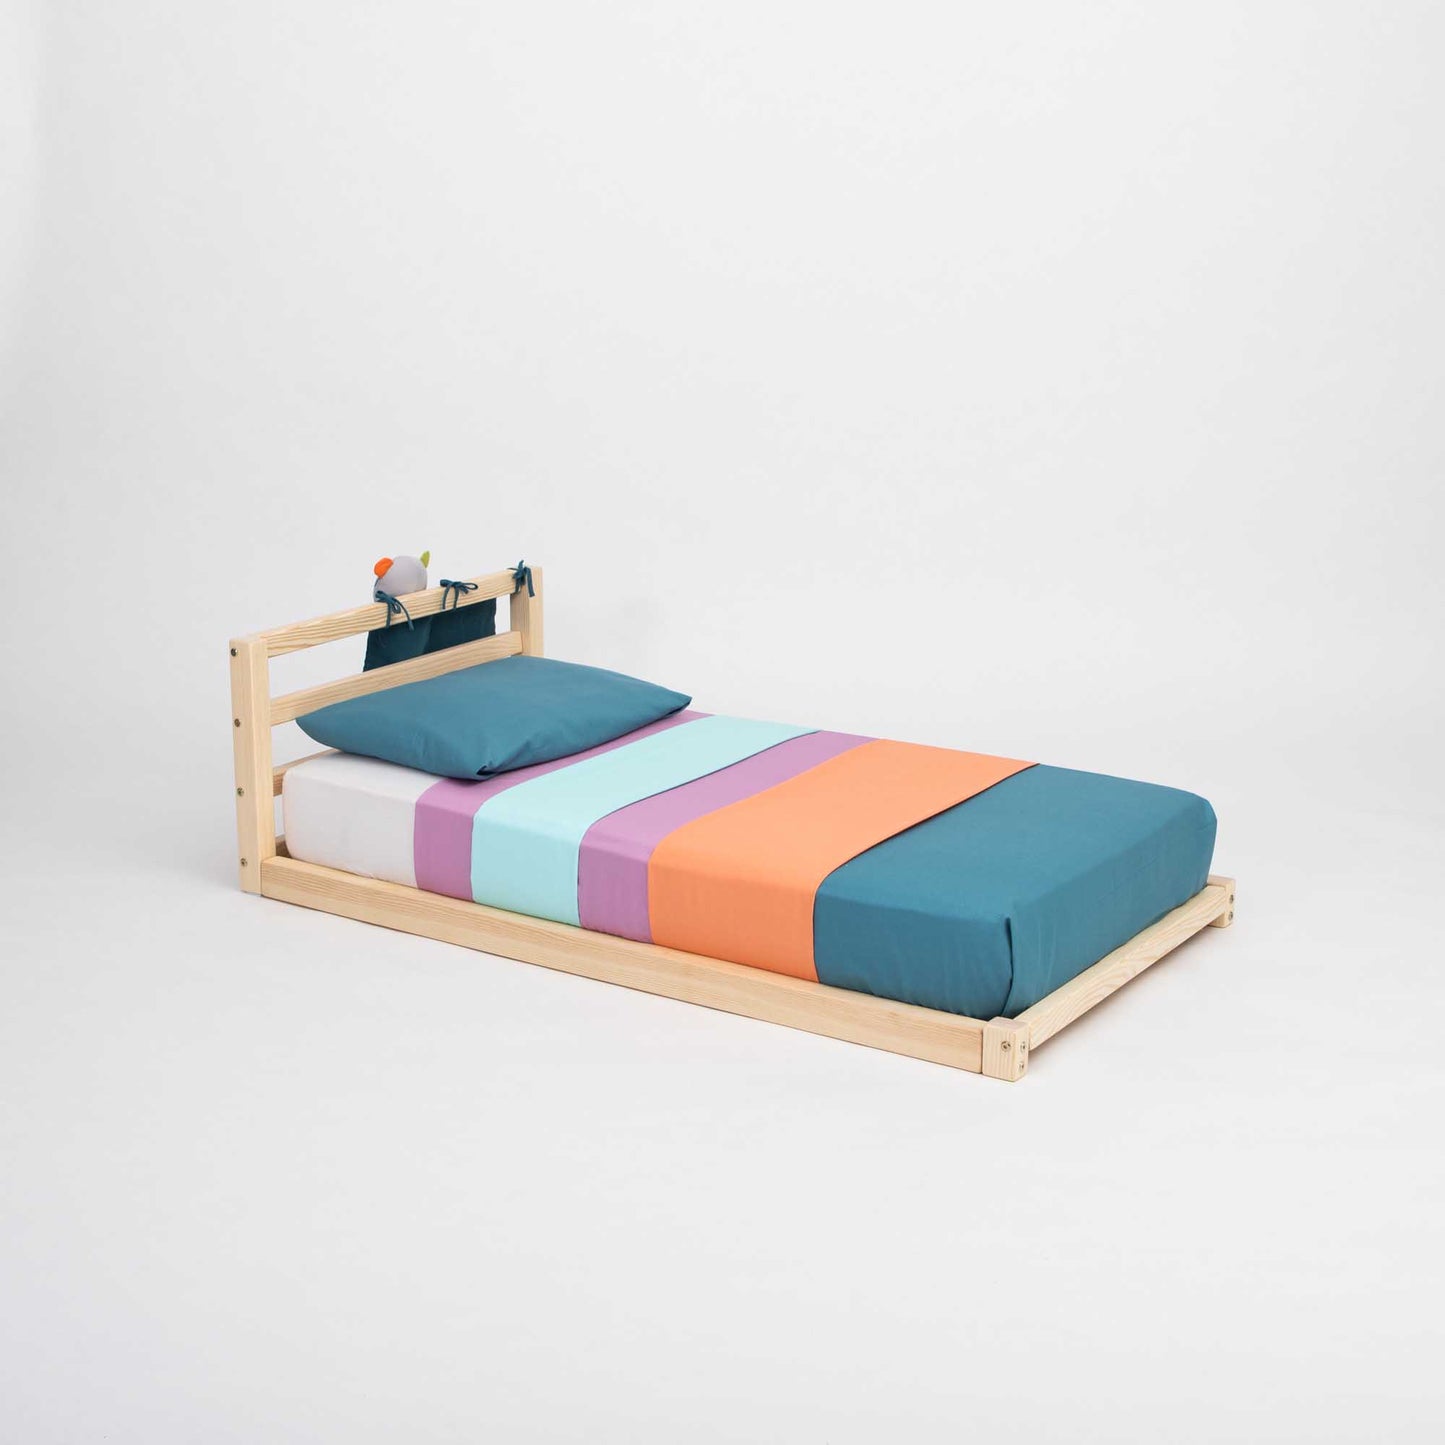 A 2-in-1 transformable kids' bed with a horizontal rail headboard for children with a wooden frame and colorful sheets that grows with the child from Sweet Home From Wood.